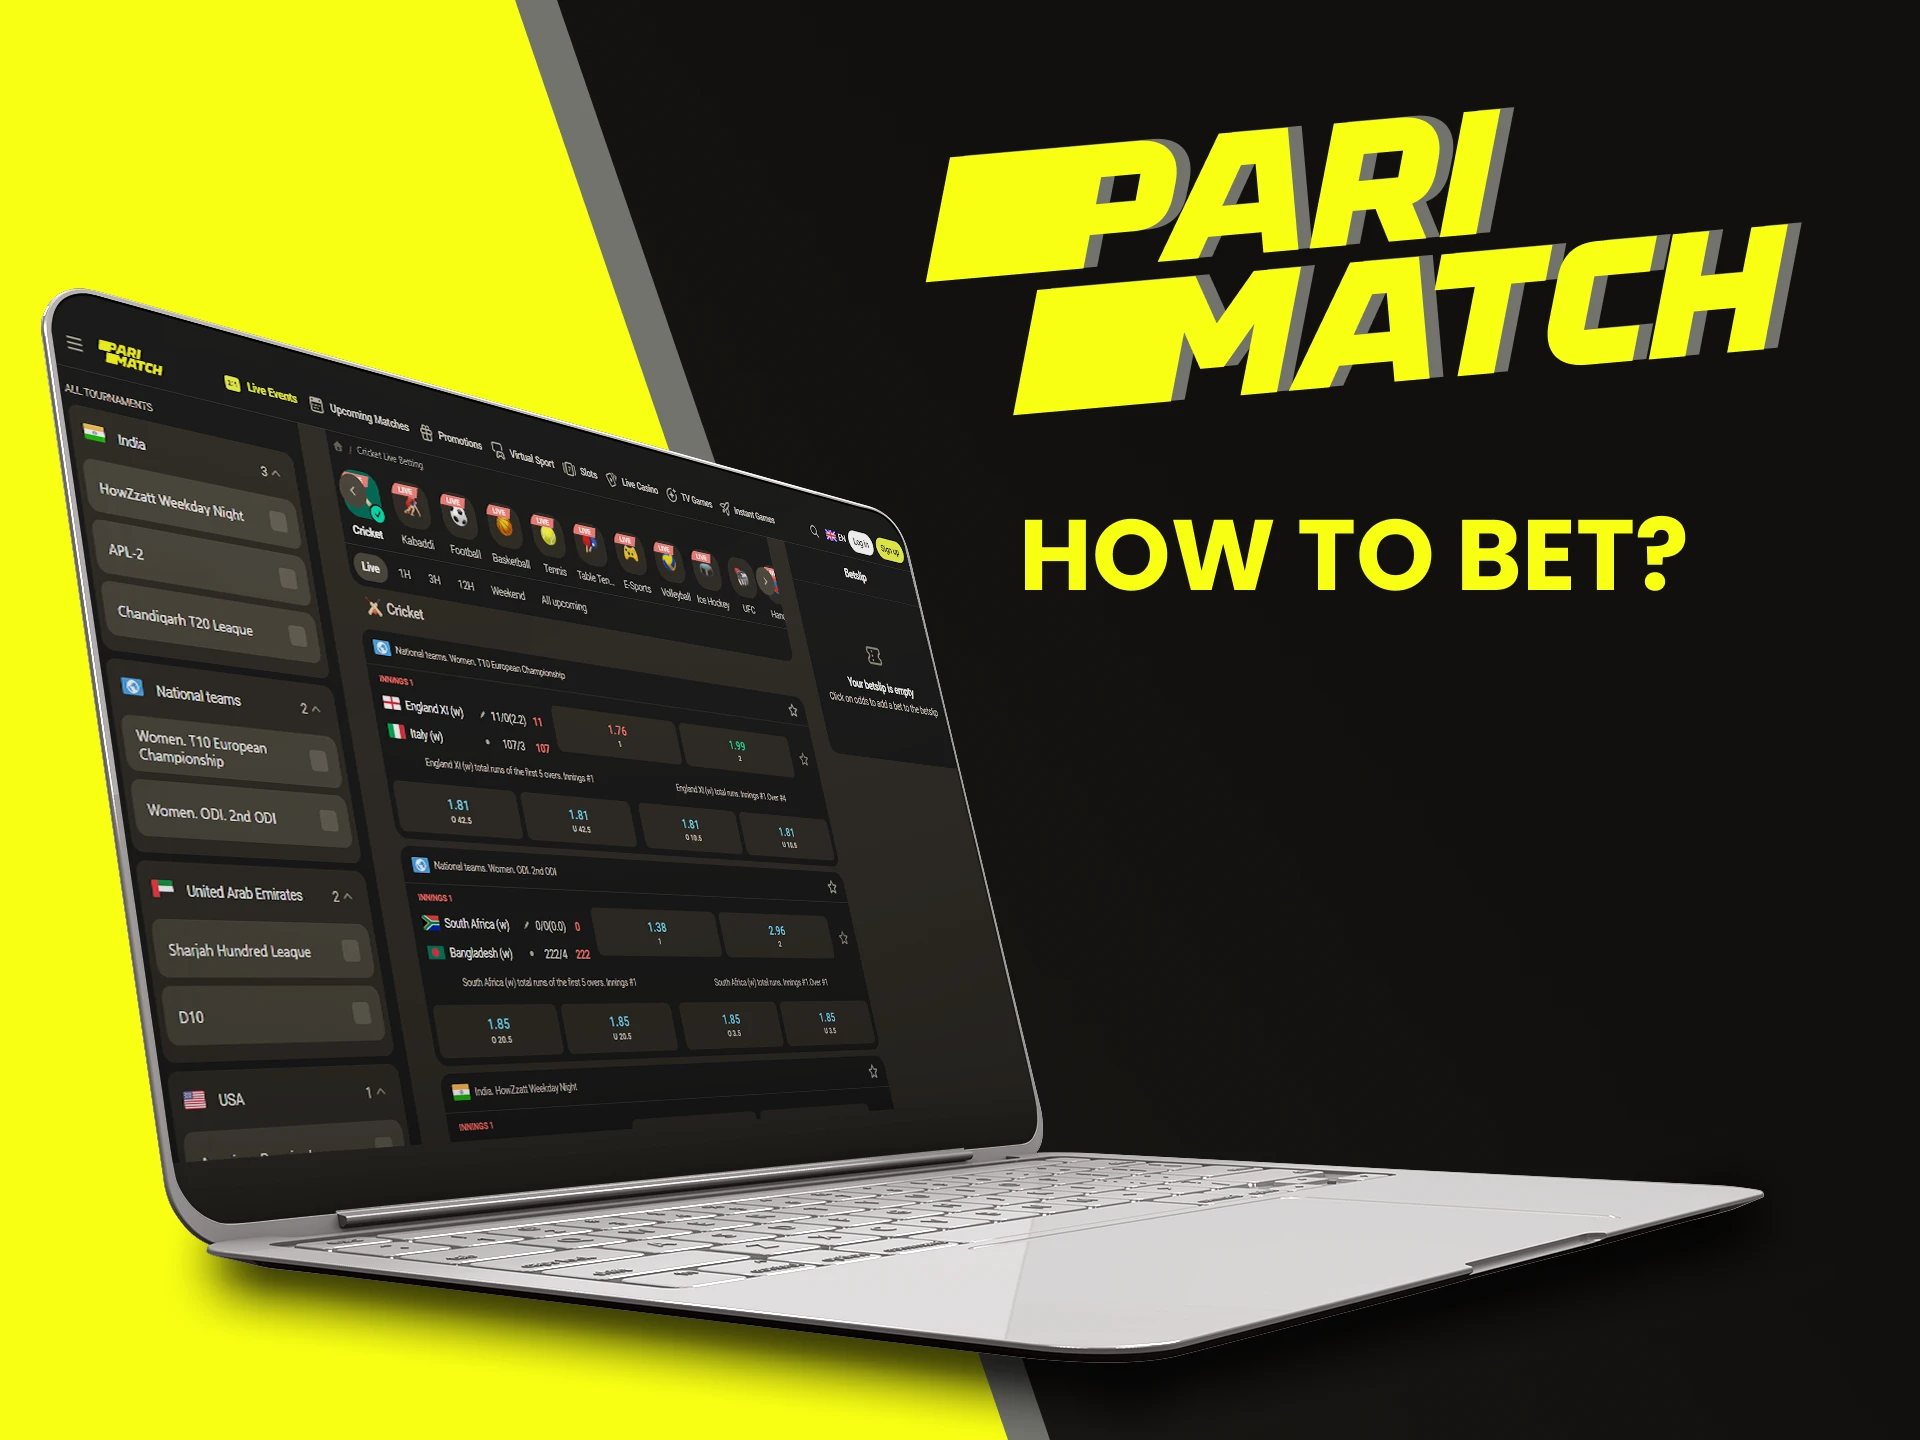 We will tell you how to start betting on Parimatch.